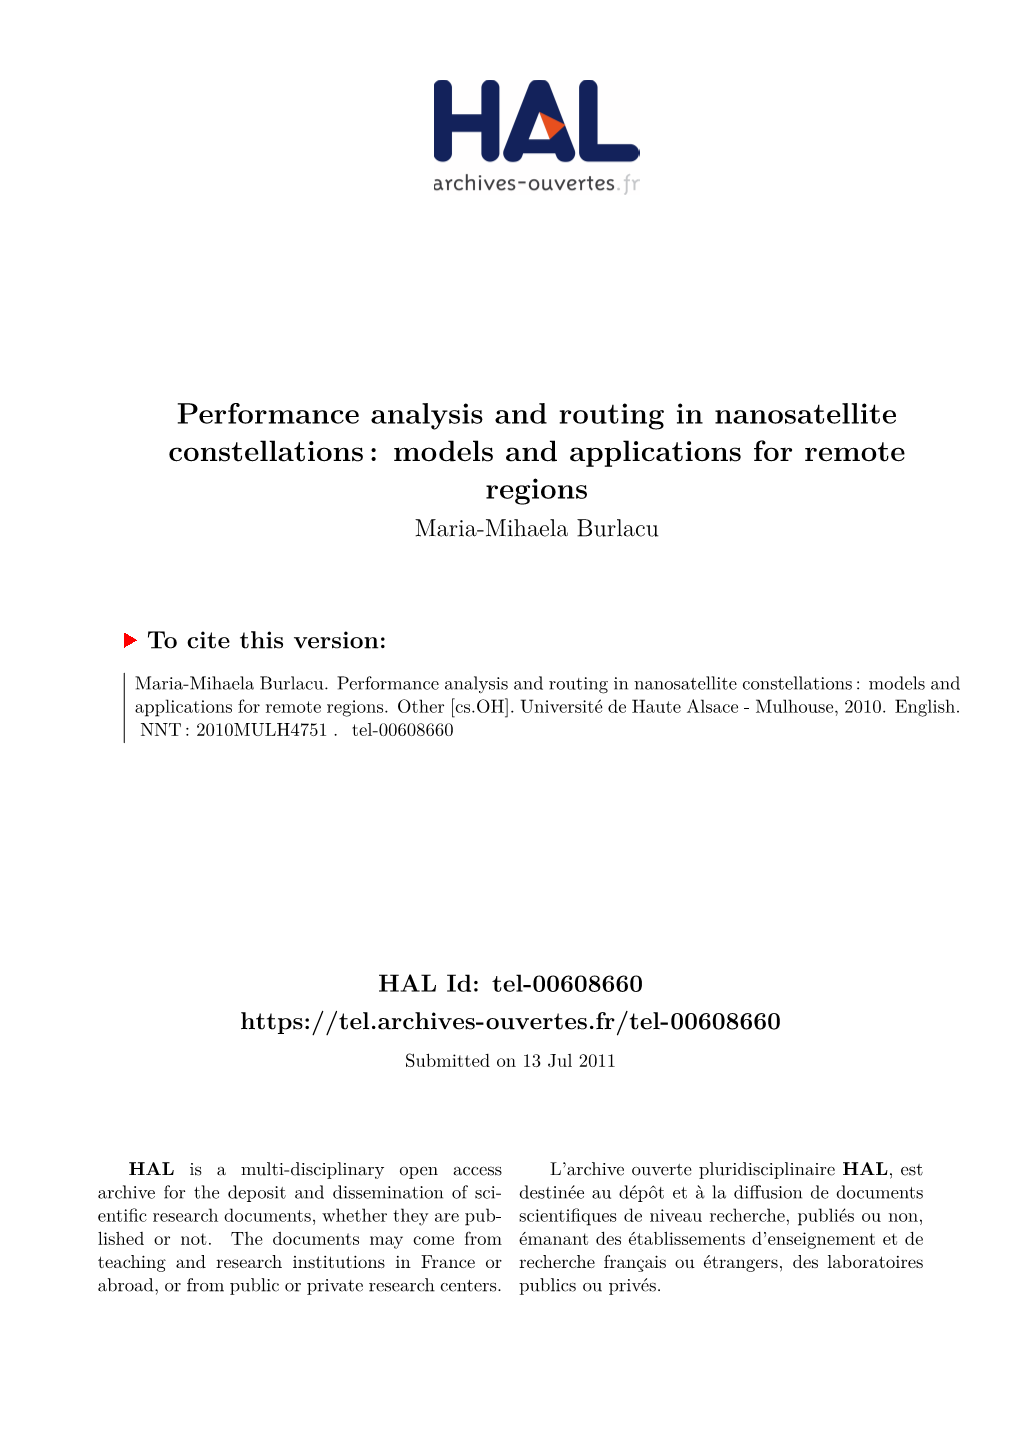 Performance Analysis and Routing in Nanosatellite Constellations: Models and Applications for Remote Regions